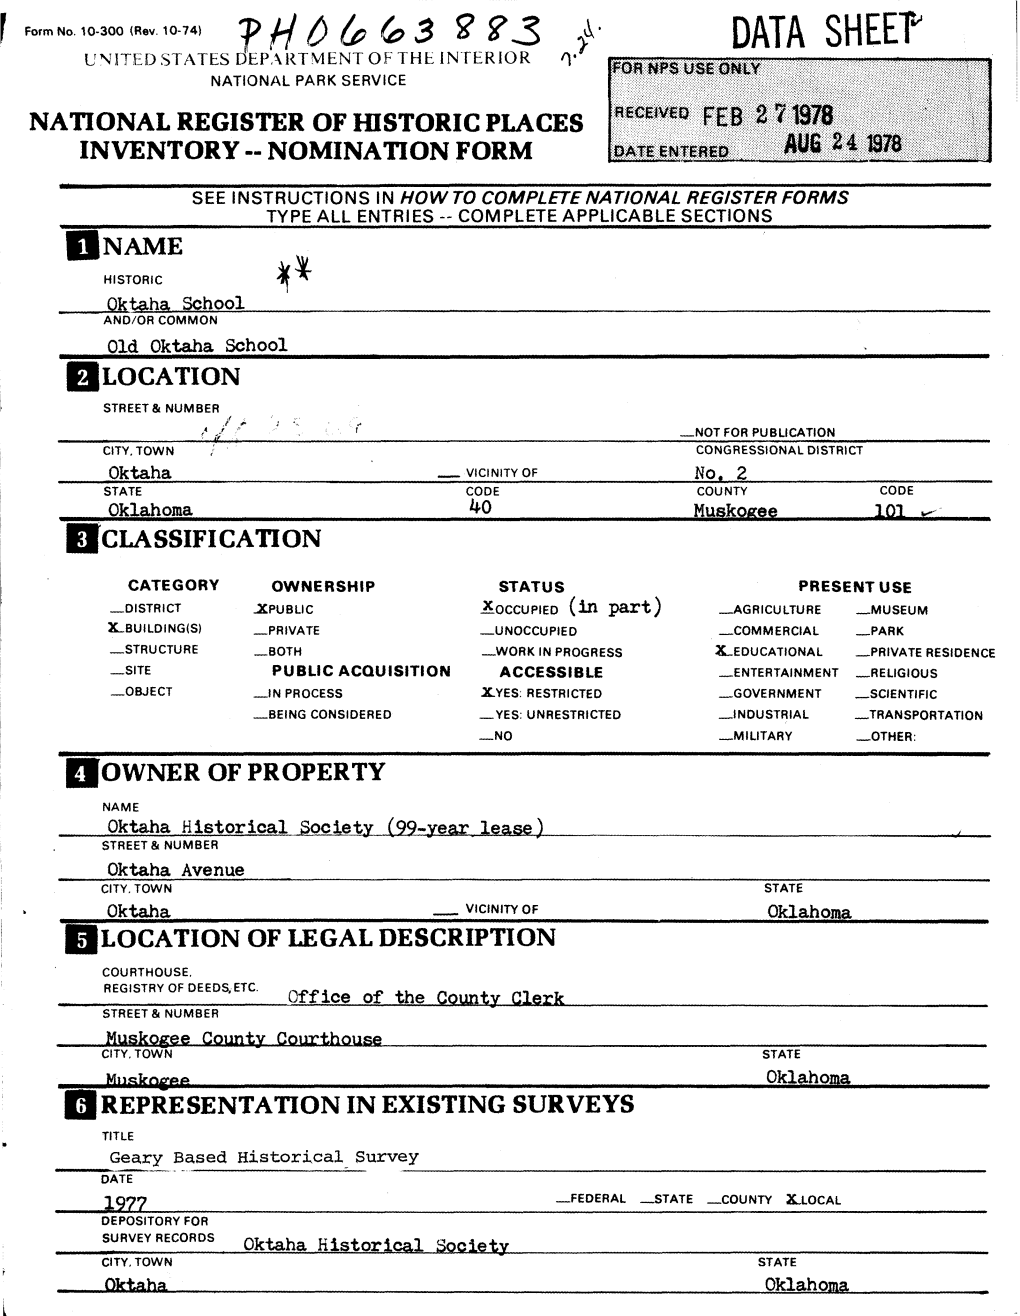 Data Sheet United States Department of the Interior 1'' National Park Service National Register of Historic Places Inventory - Nomination Form